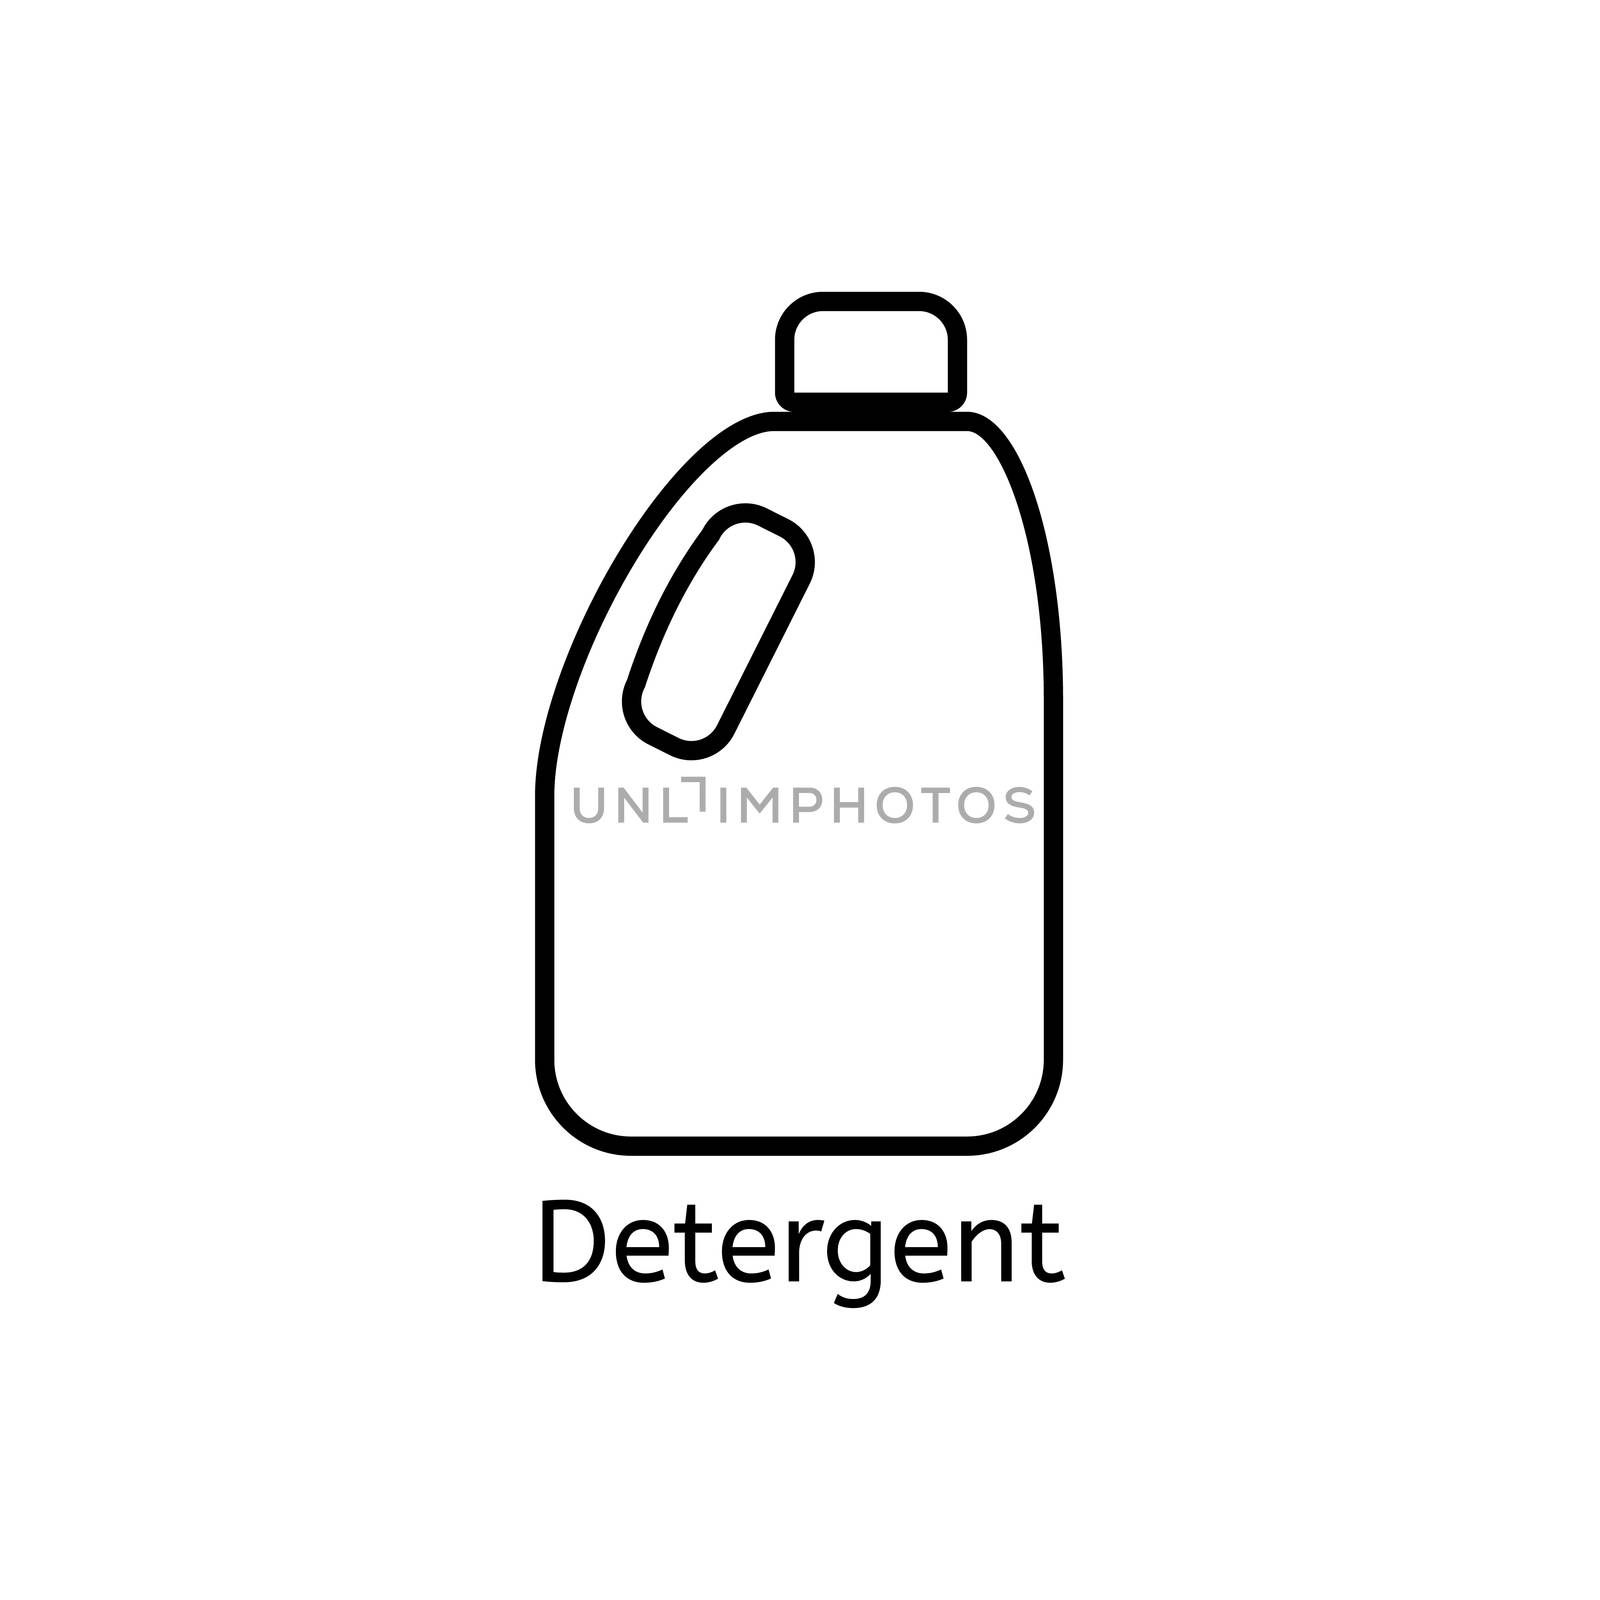 Detergents simple line icon. Liquid detergent thin linear signs. Means for cleaning simple concept for websites, infographic, mobile applications. by Elena_Garder